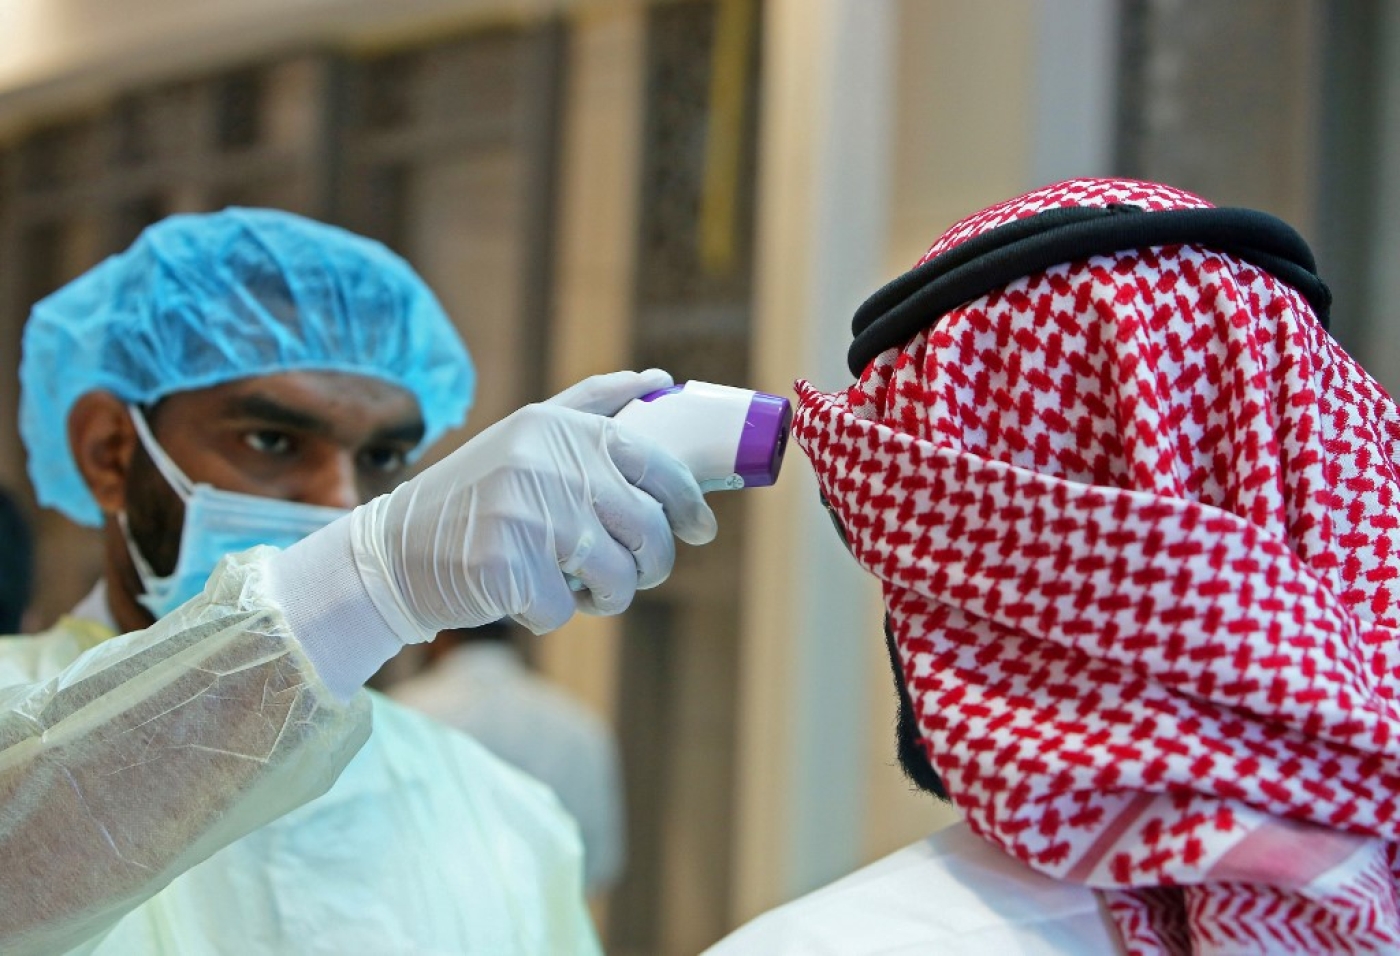 Coronavirus: Kuwait reports first death from Covid-19 as cases near 500 |  Middle East Eye